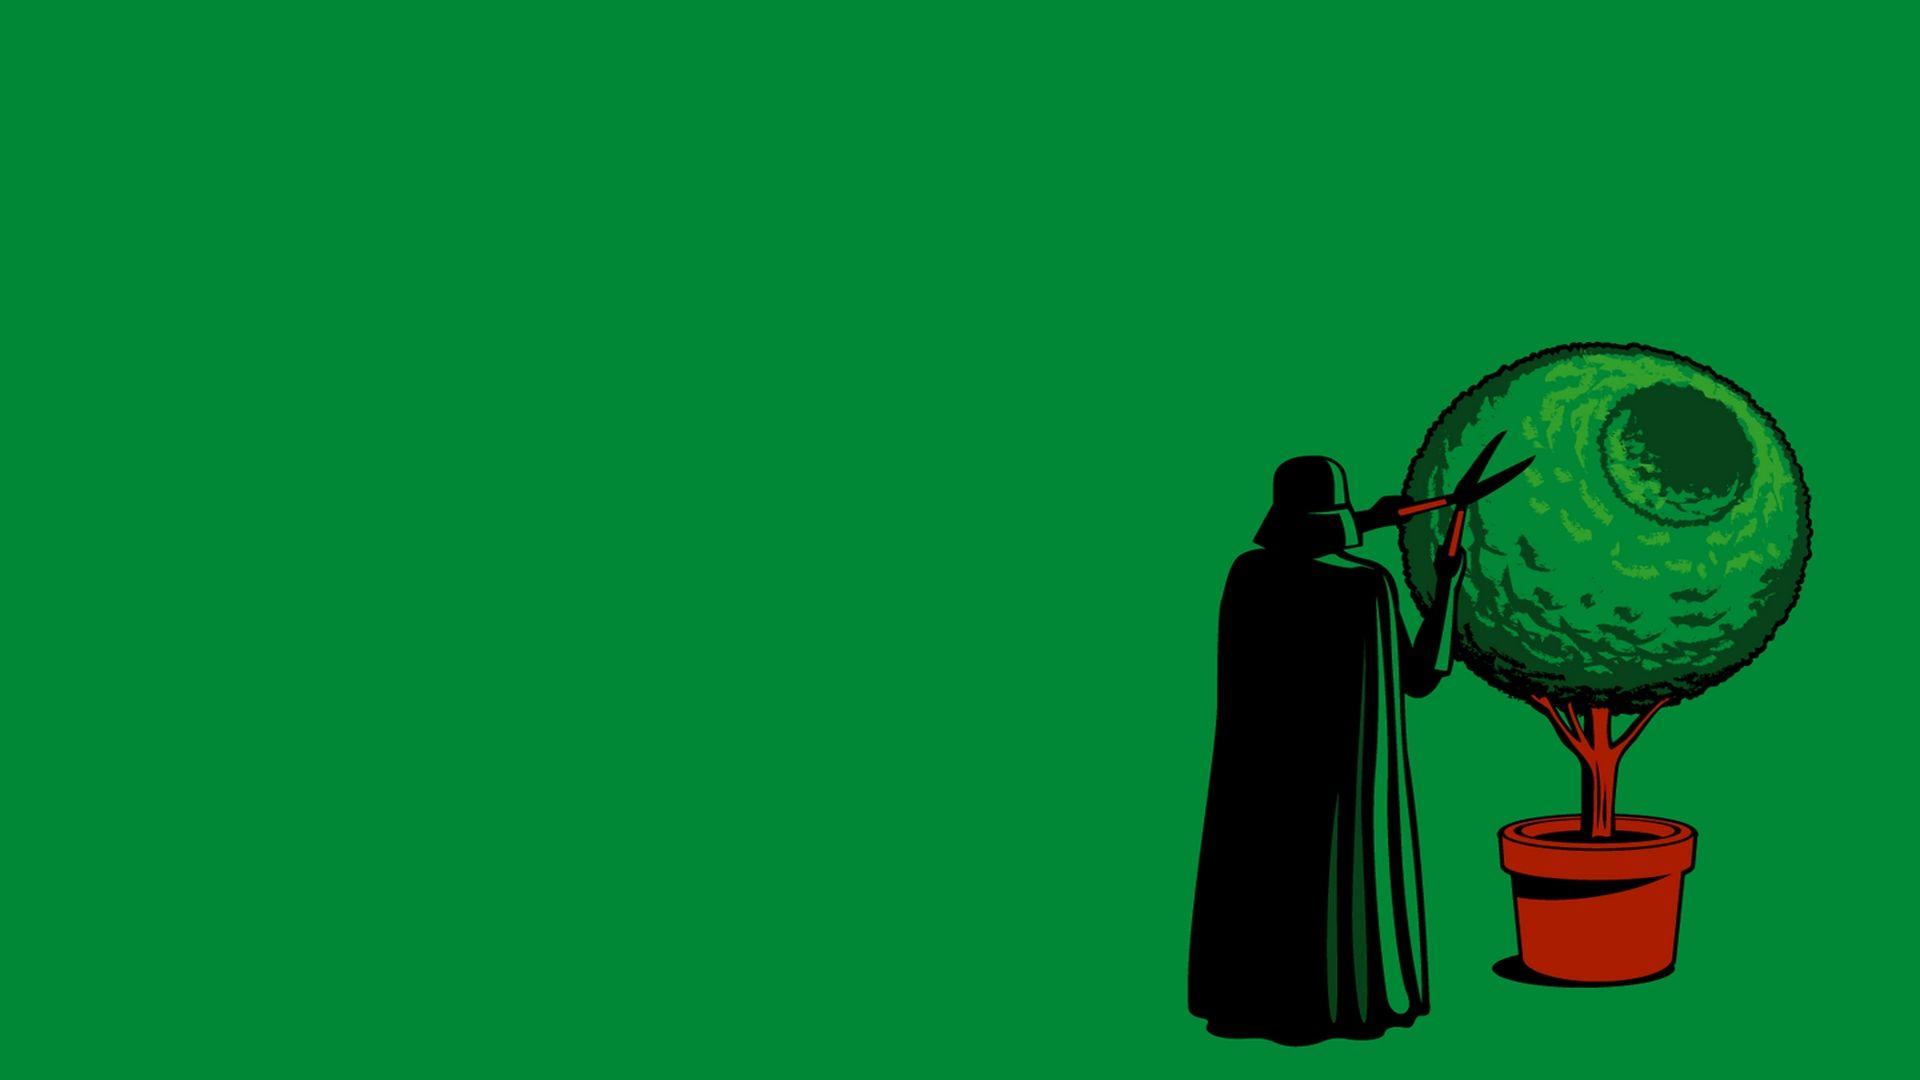 image For > Funny Star Wars Wallpaper 1920x1080